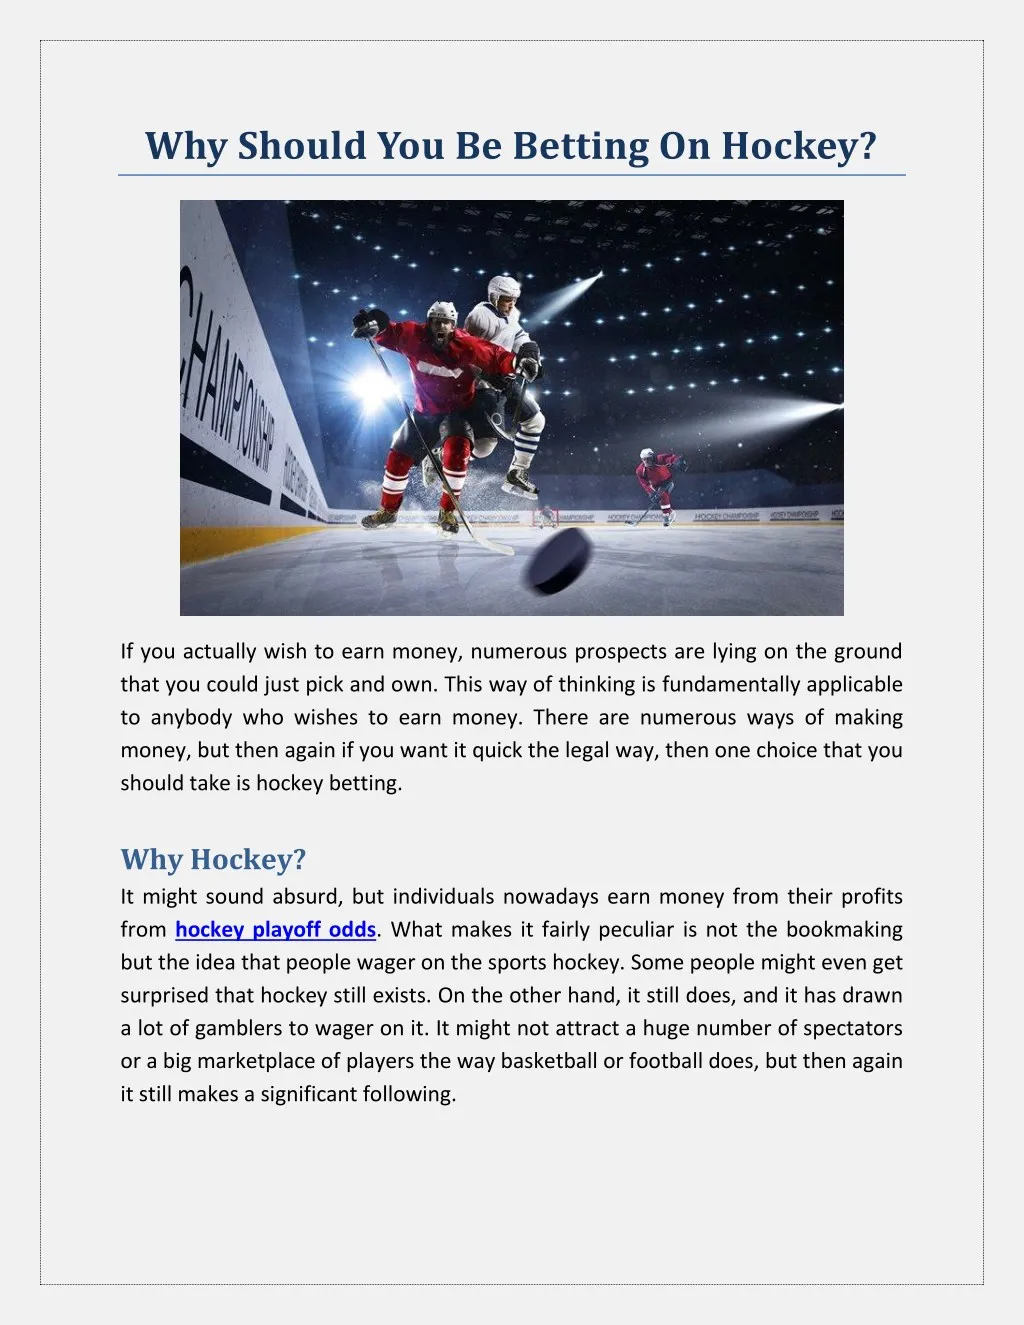 why should you be betting on hockey